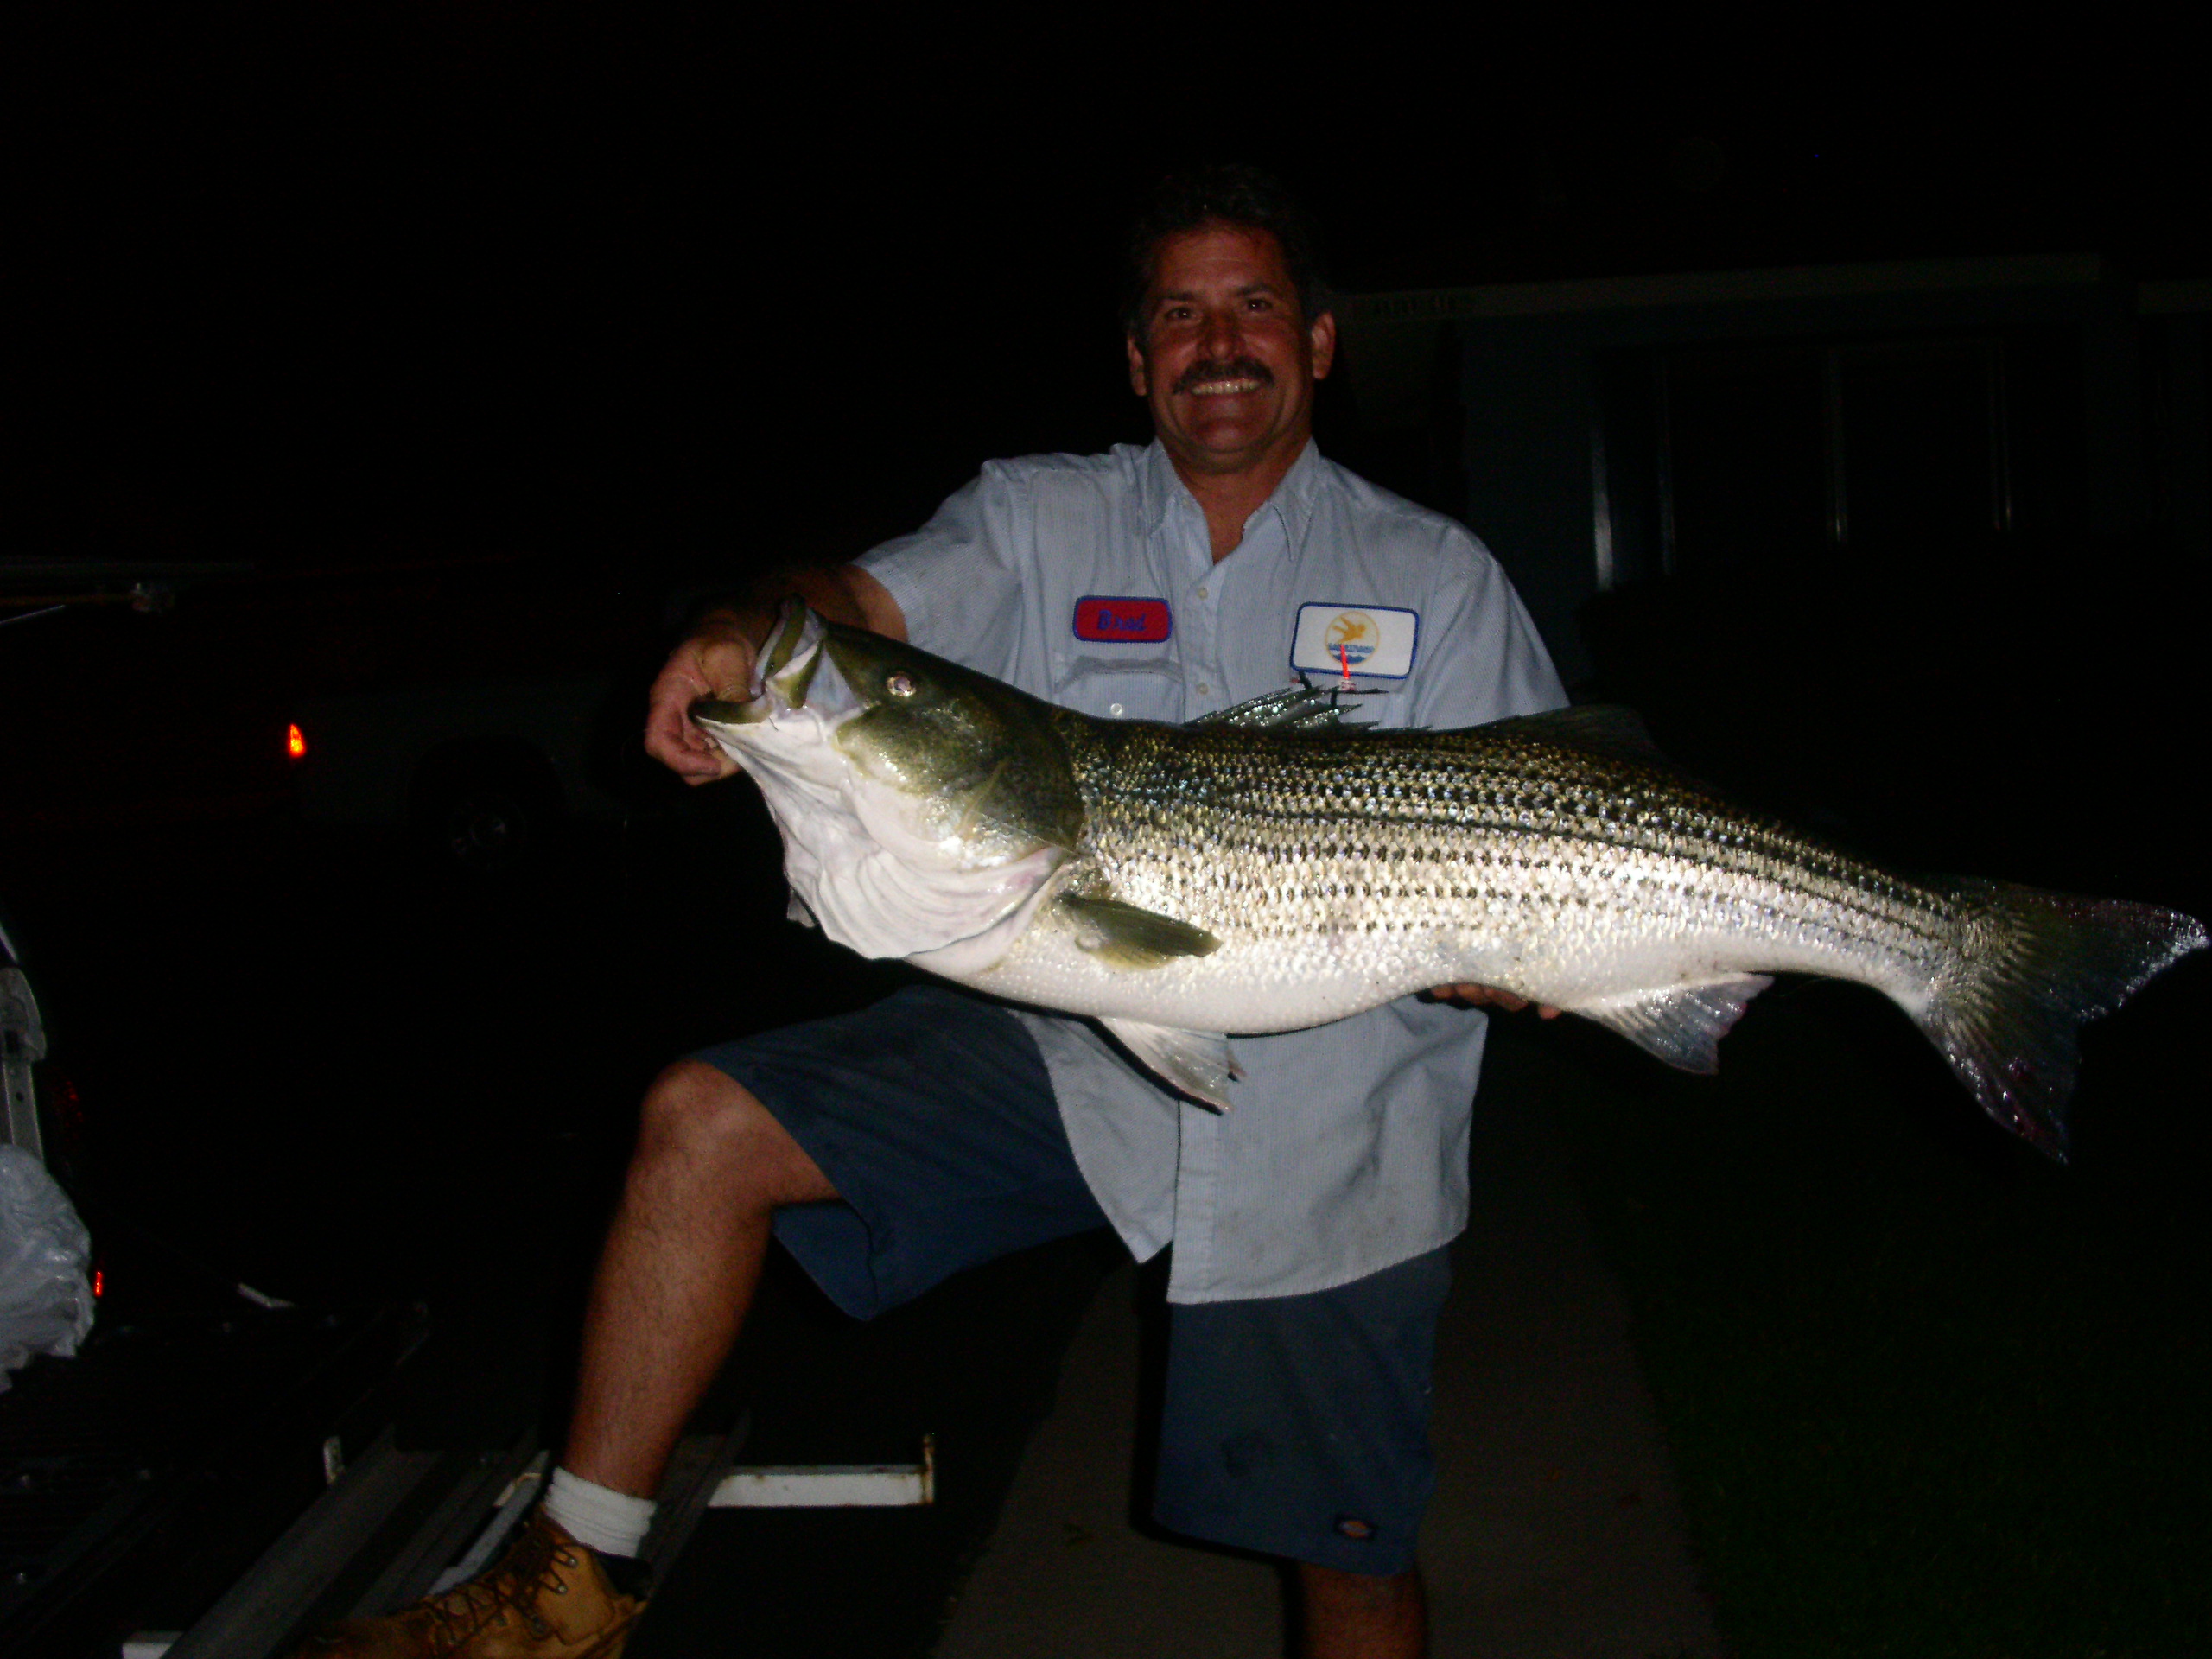 Striped bass fishing in estuaries, bays and along the beach with